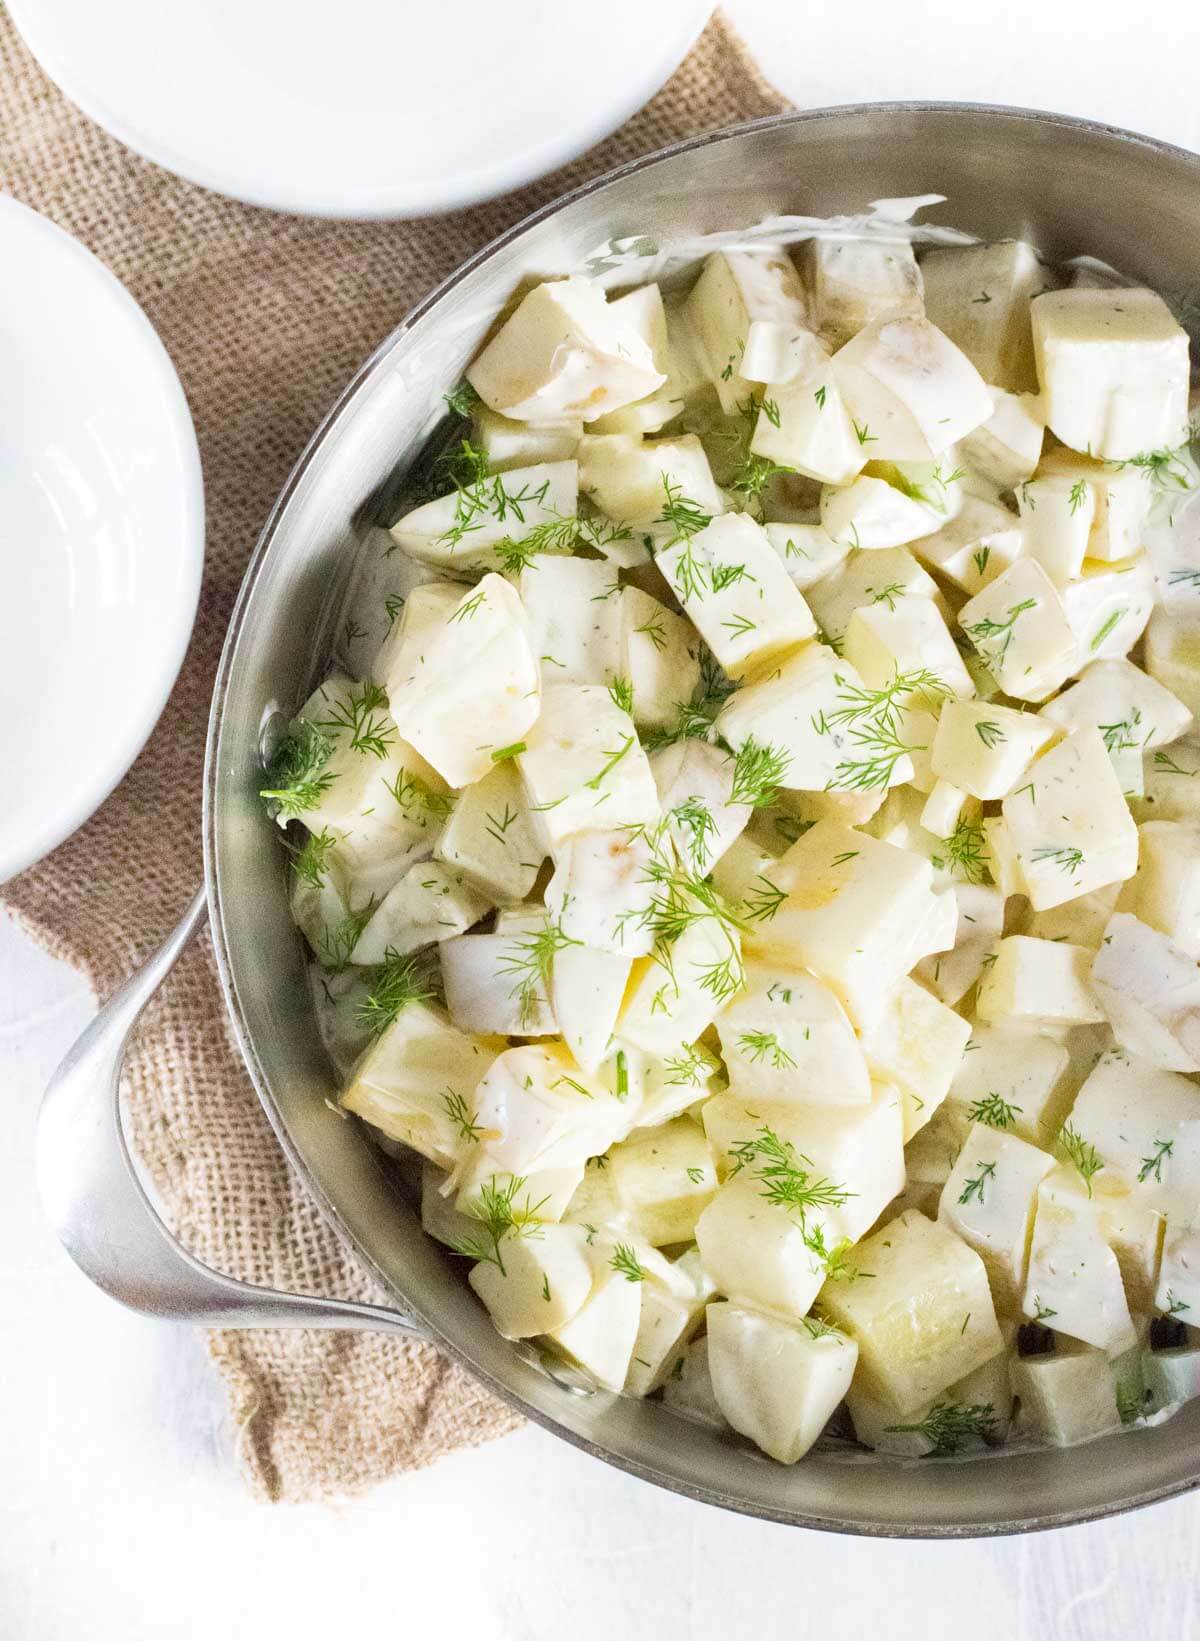 Making potato salad with dill.